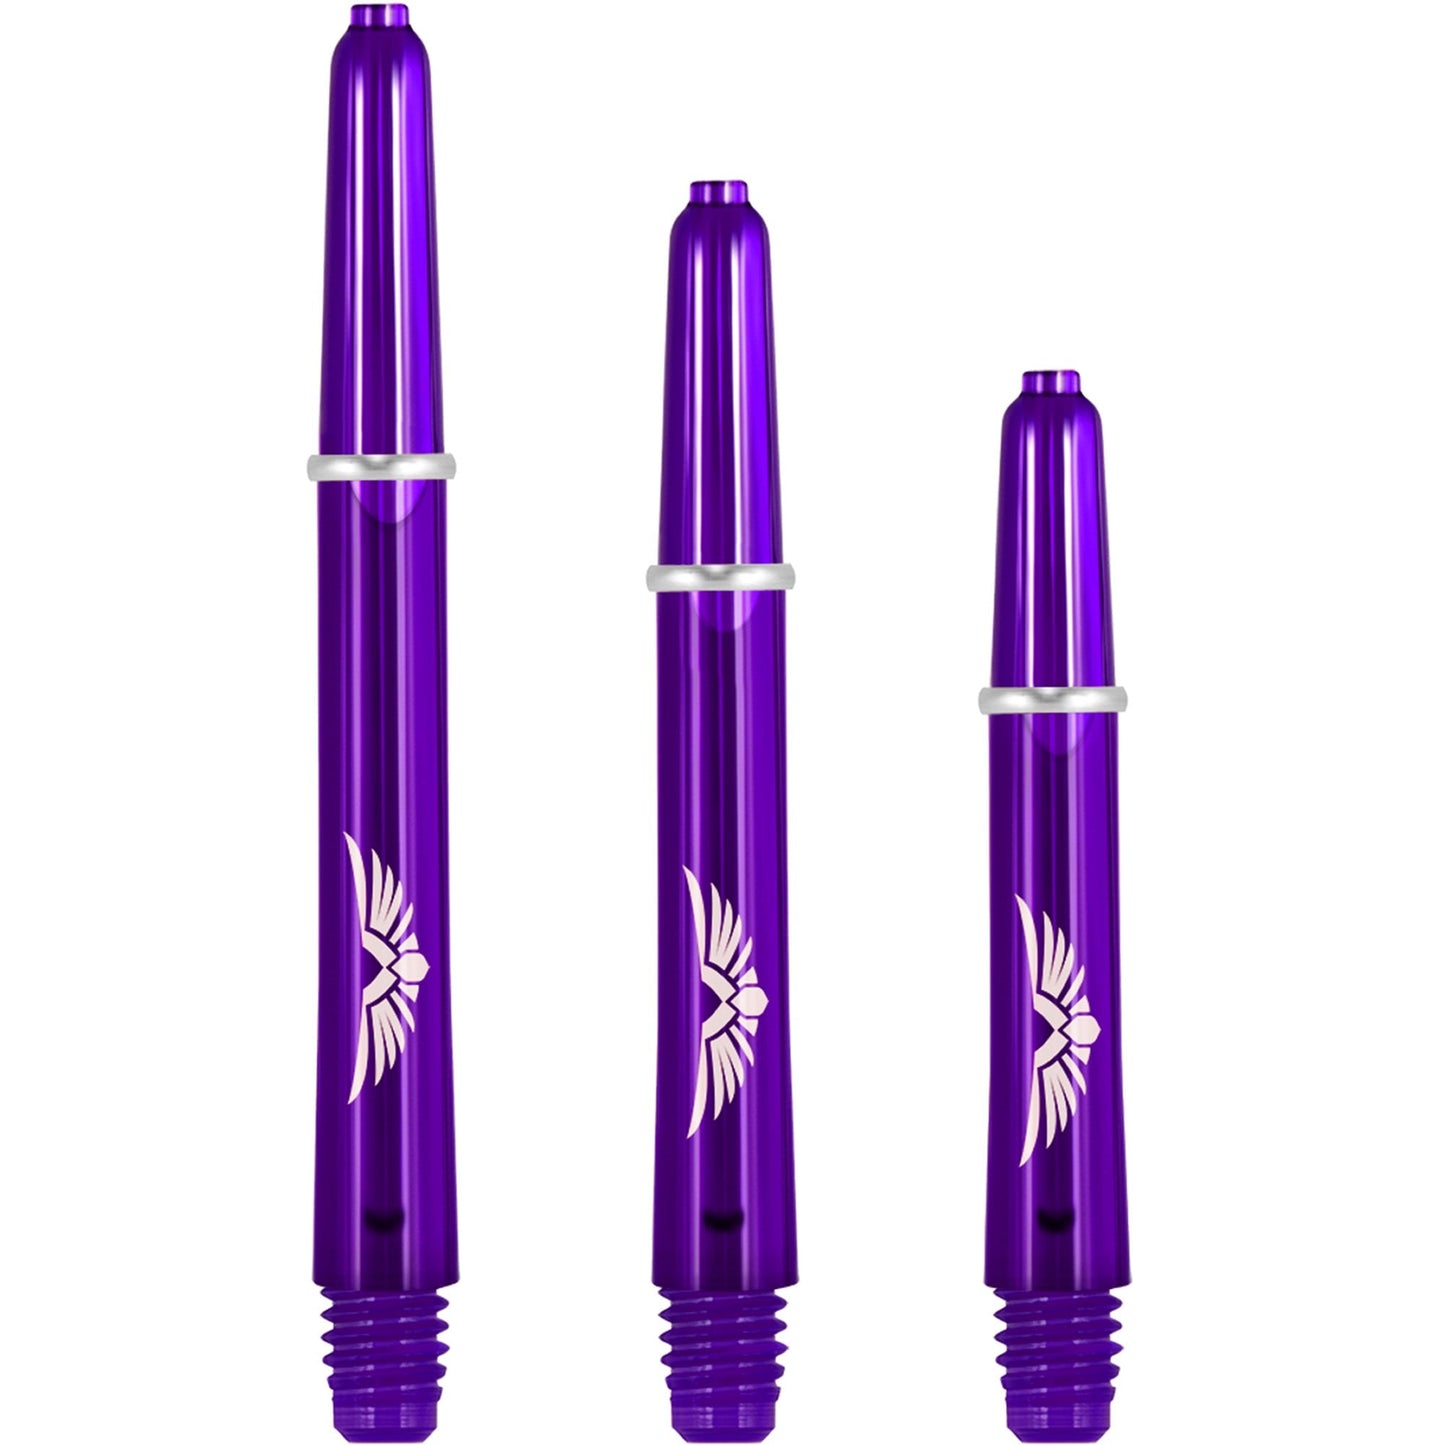 Shot Eagle Claw Dart Shafts - with Machined Rings - Strong Polycarbonate Stems - Purple